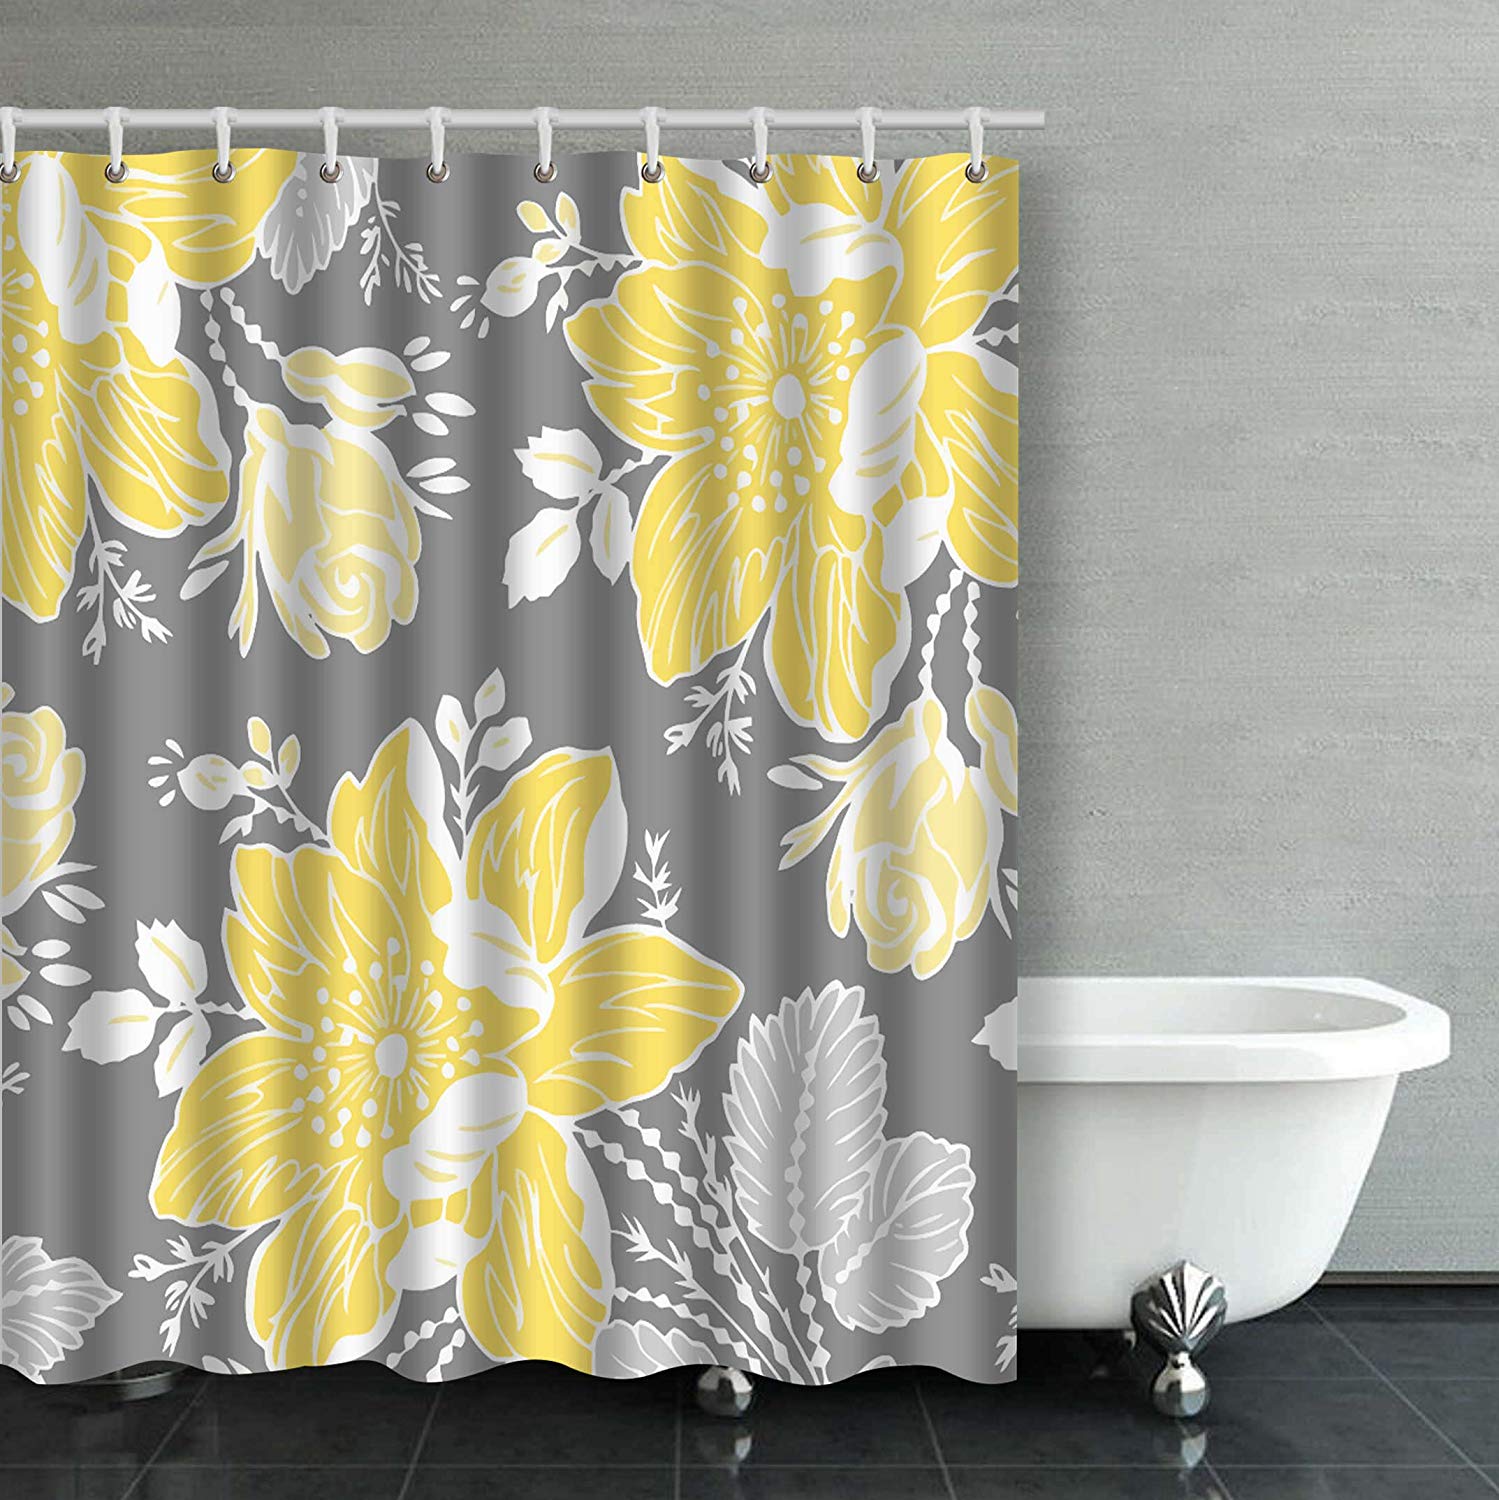 Details about  / Gecko Yellow Nice Black 3D Shower Curtain Waterproof Fabric Bathroom Decoration